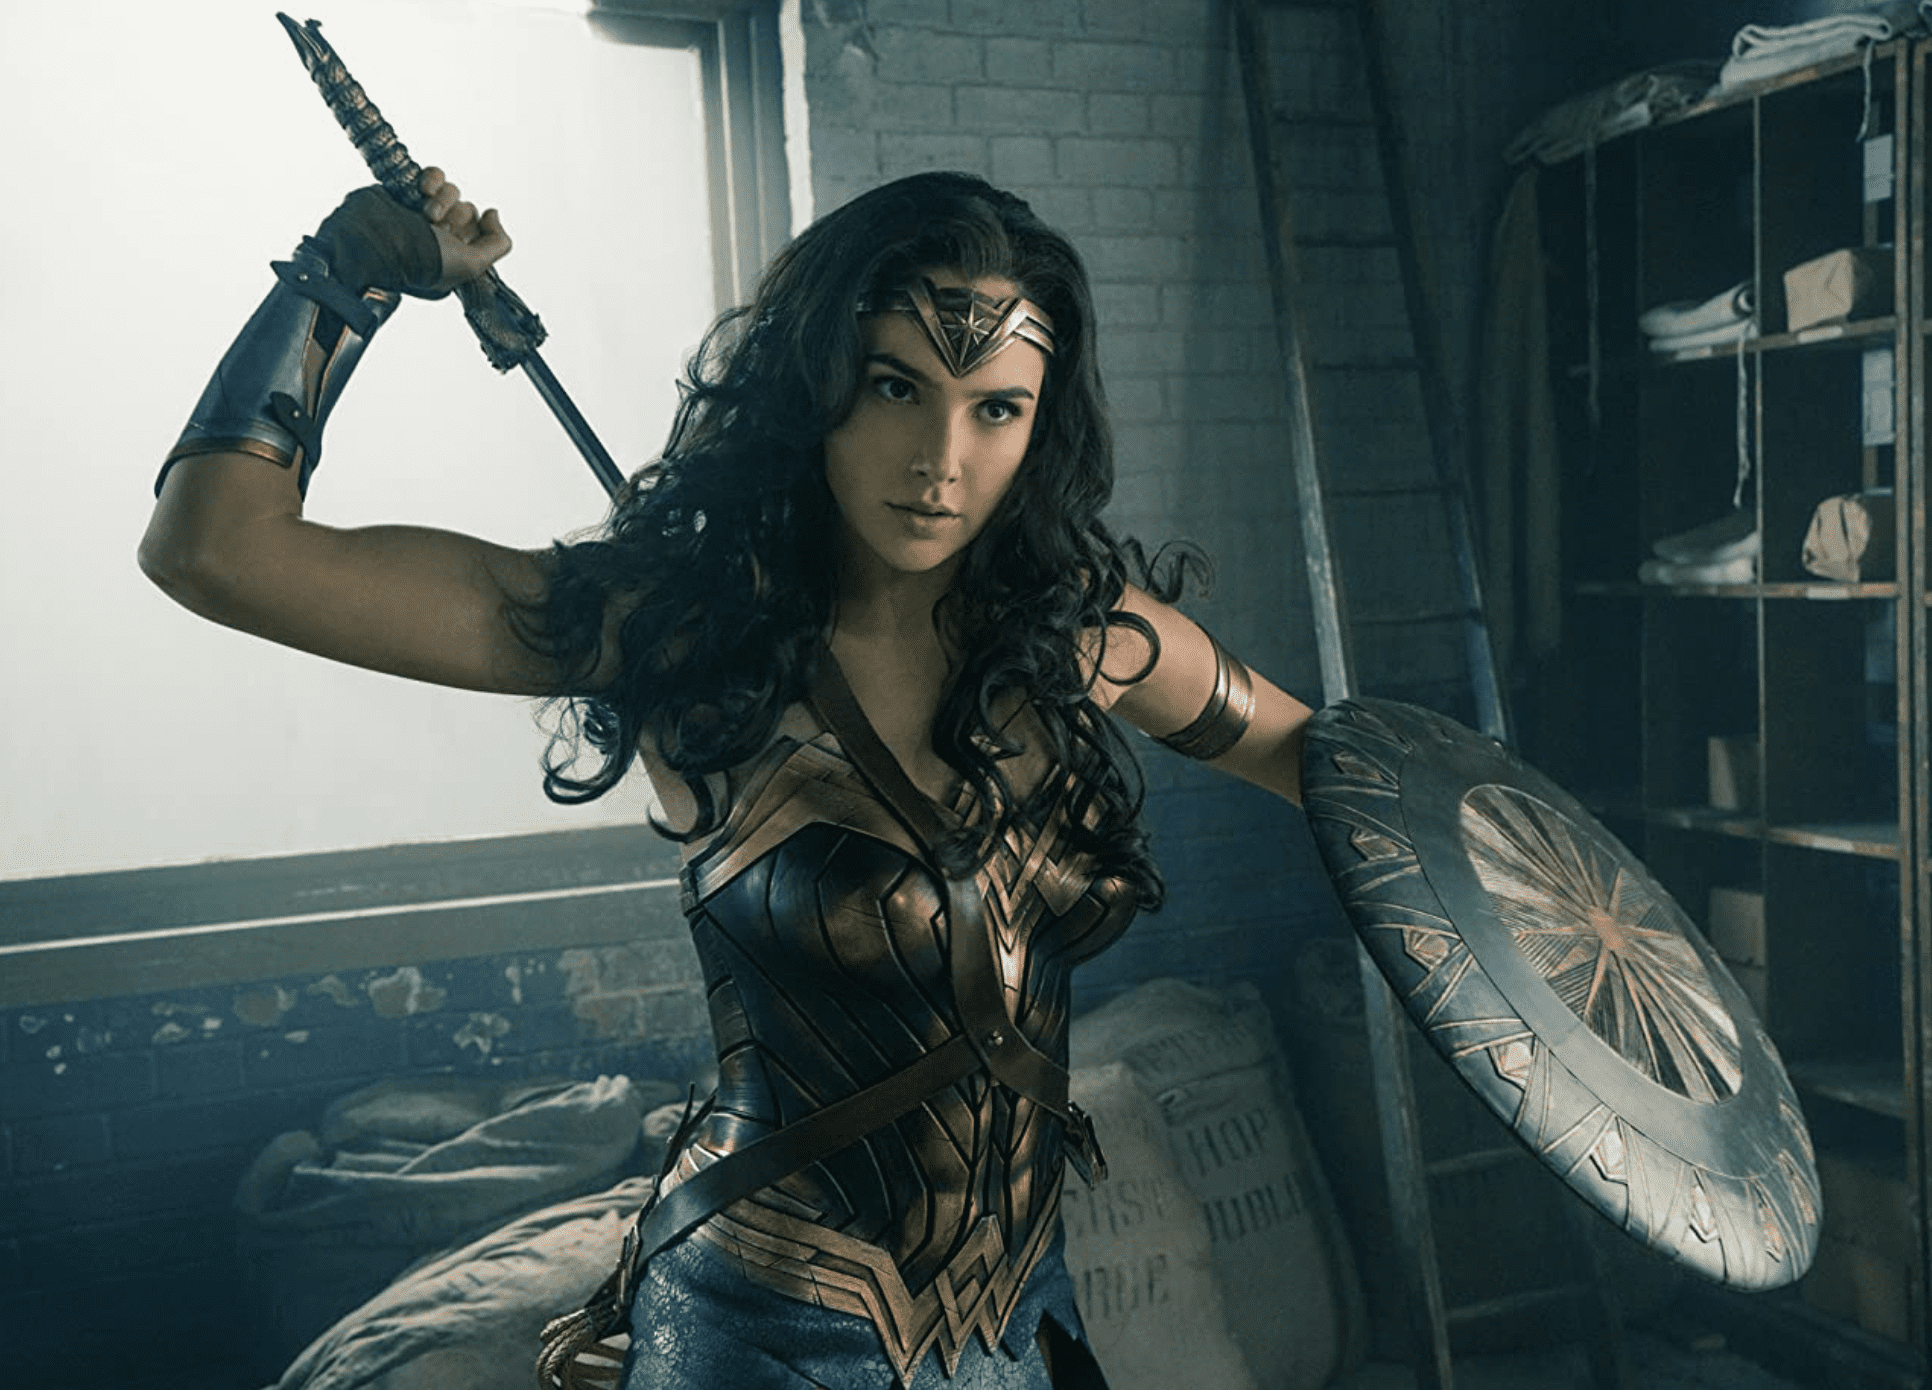 Wonder Woman shows off her fighting in World War II in this image from HBO Max